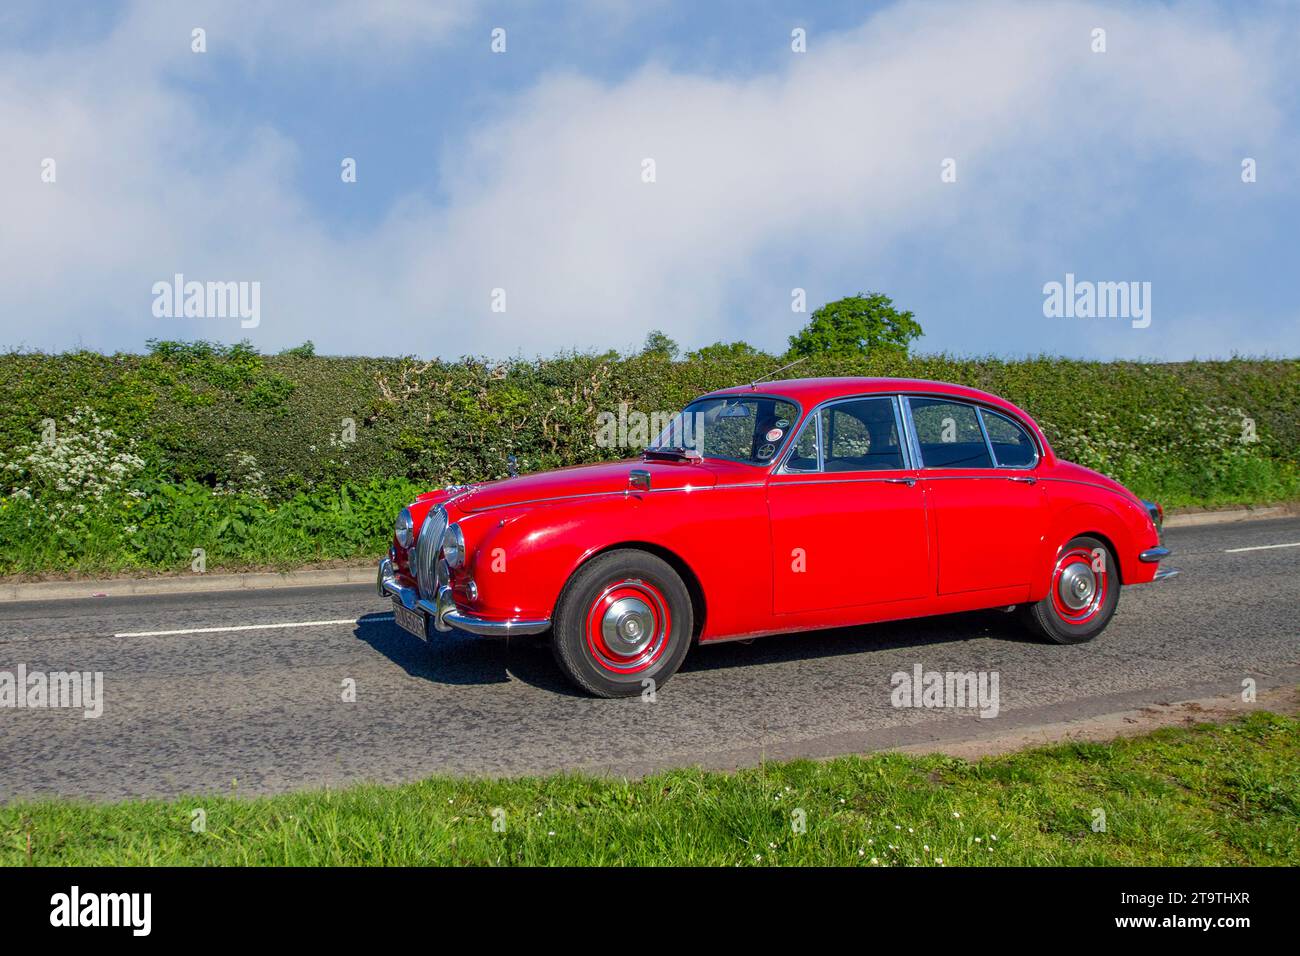 1968 60s sixties Red British Jaguar Mark 2 240 , luxury executive car, Petrol 2483 cc, 2.5 l, Cylinders 6 Cyl;  sports and performance car enthusiasts travelling in Cheshire, UK Stock Photo